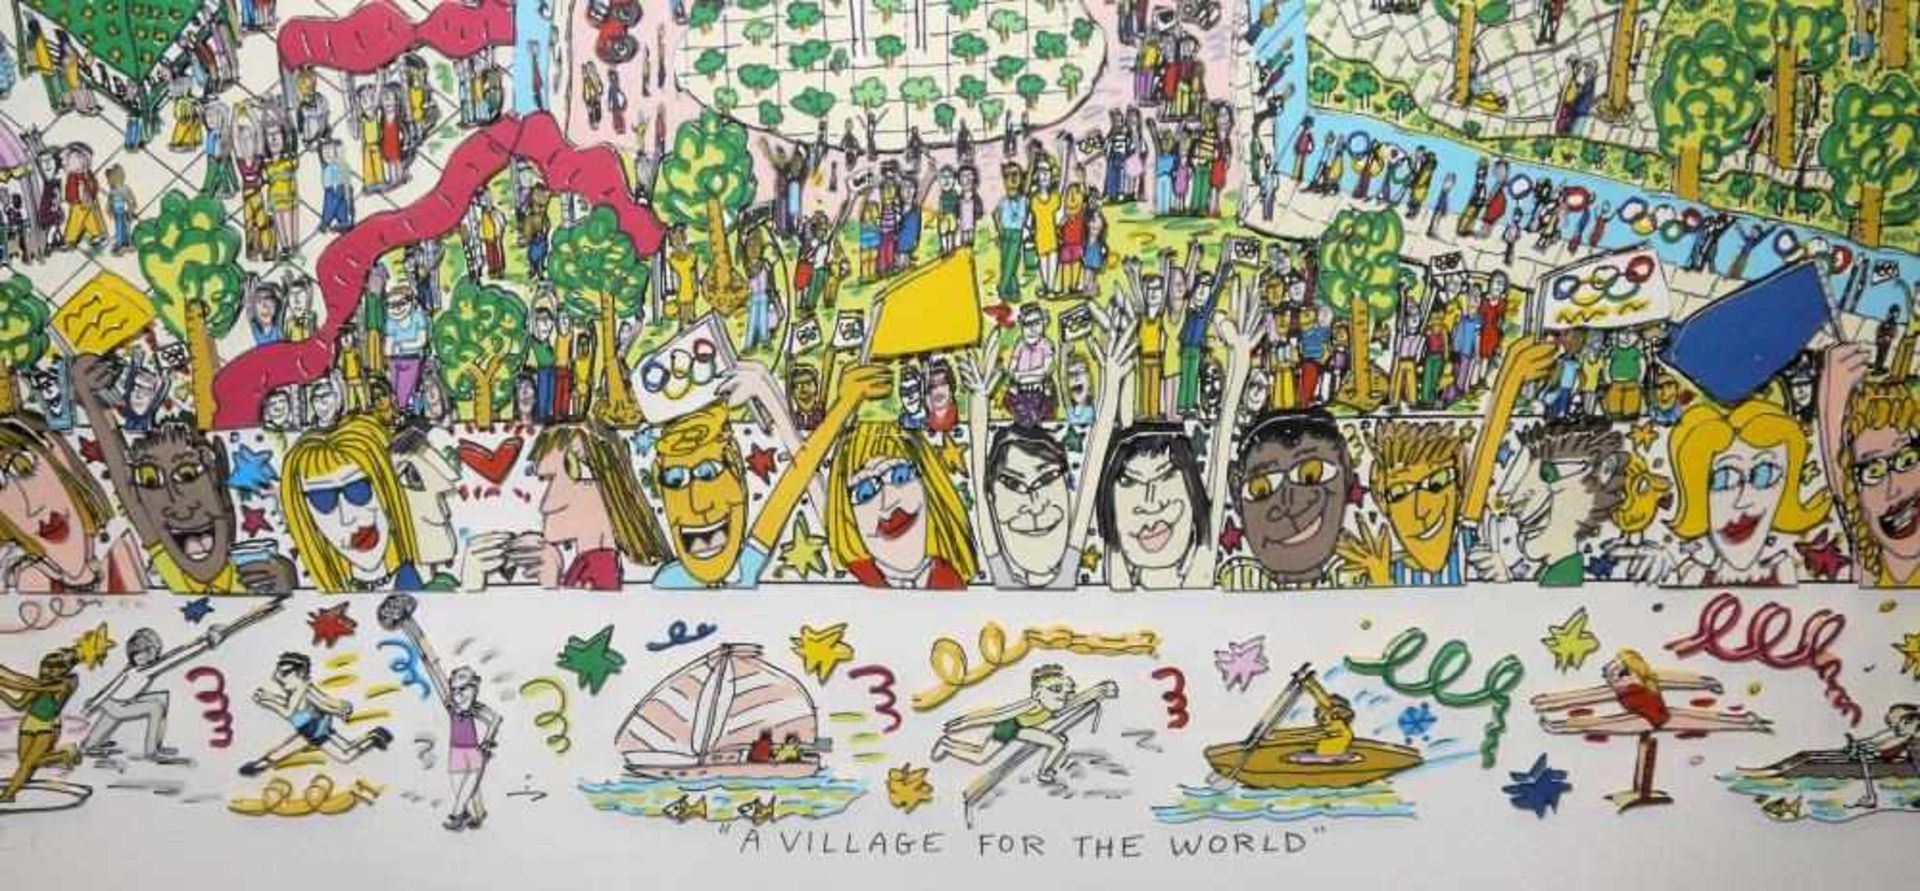 James Rizzi, “A village for the world”, große 3 – D Farblithographie von 1996, sign., Galerierahmung - Image 3 of 3